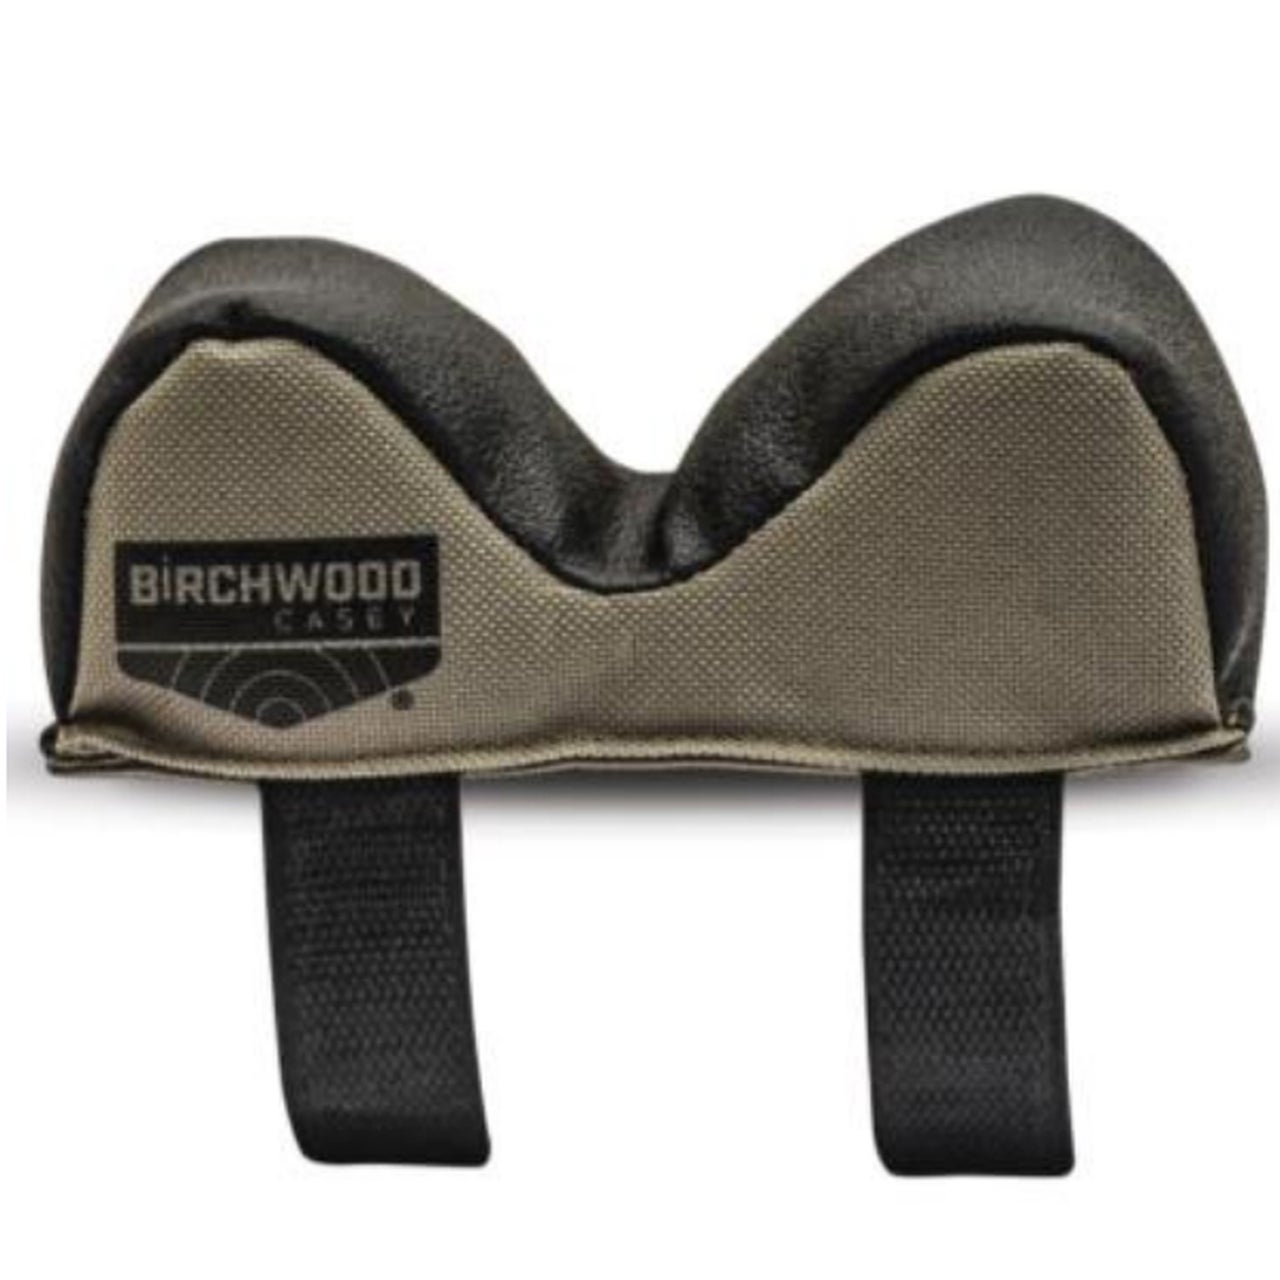 New Shooting Bags and Gun Rests from Birchwood Casey